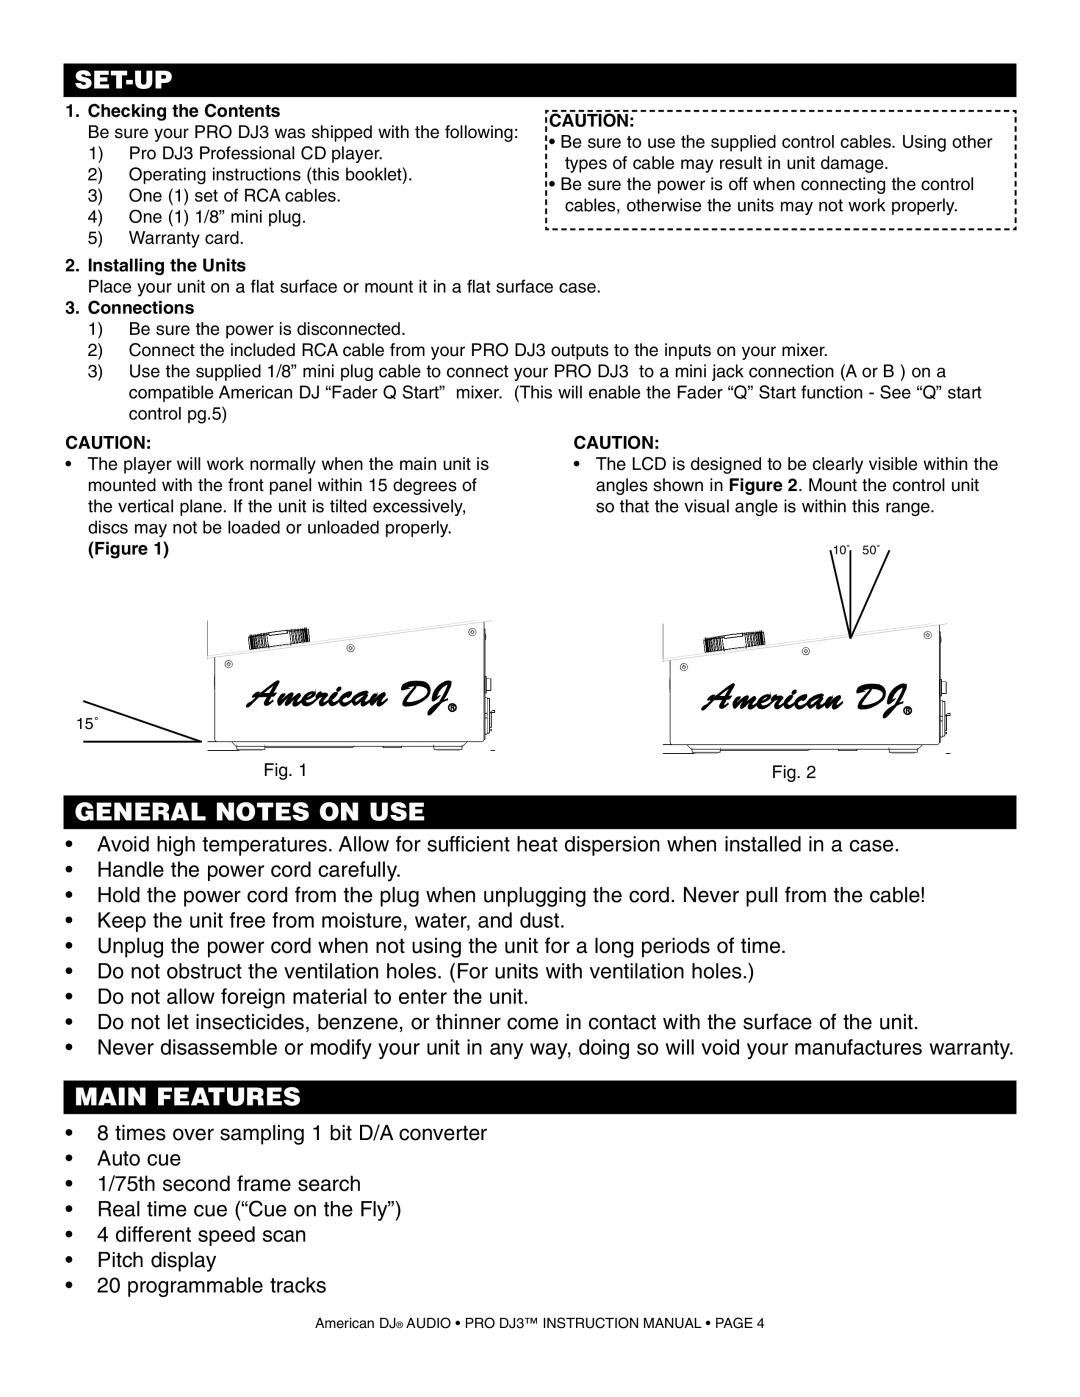 American Audio PRO DJ 3 manual Set-Up, General Notes On Use, Main Features 